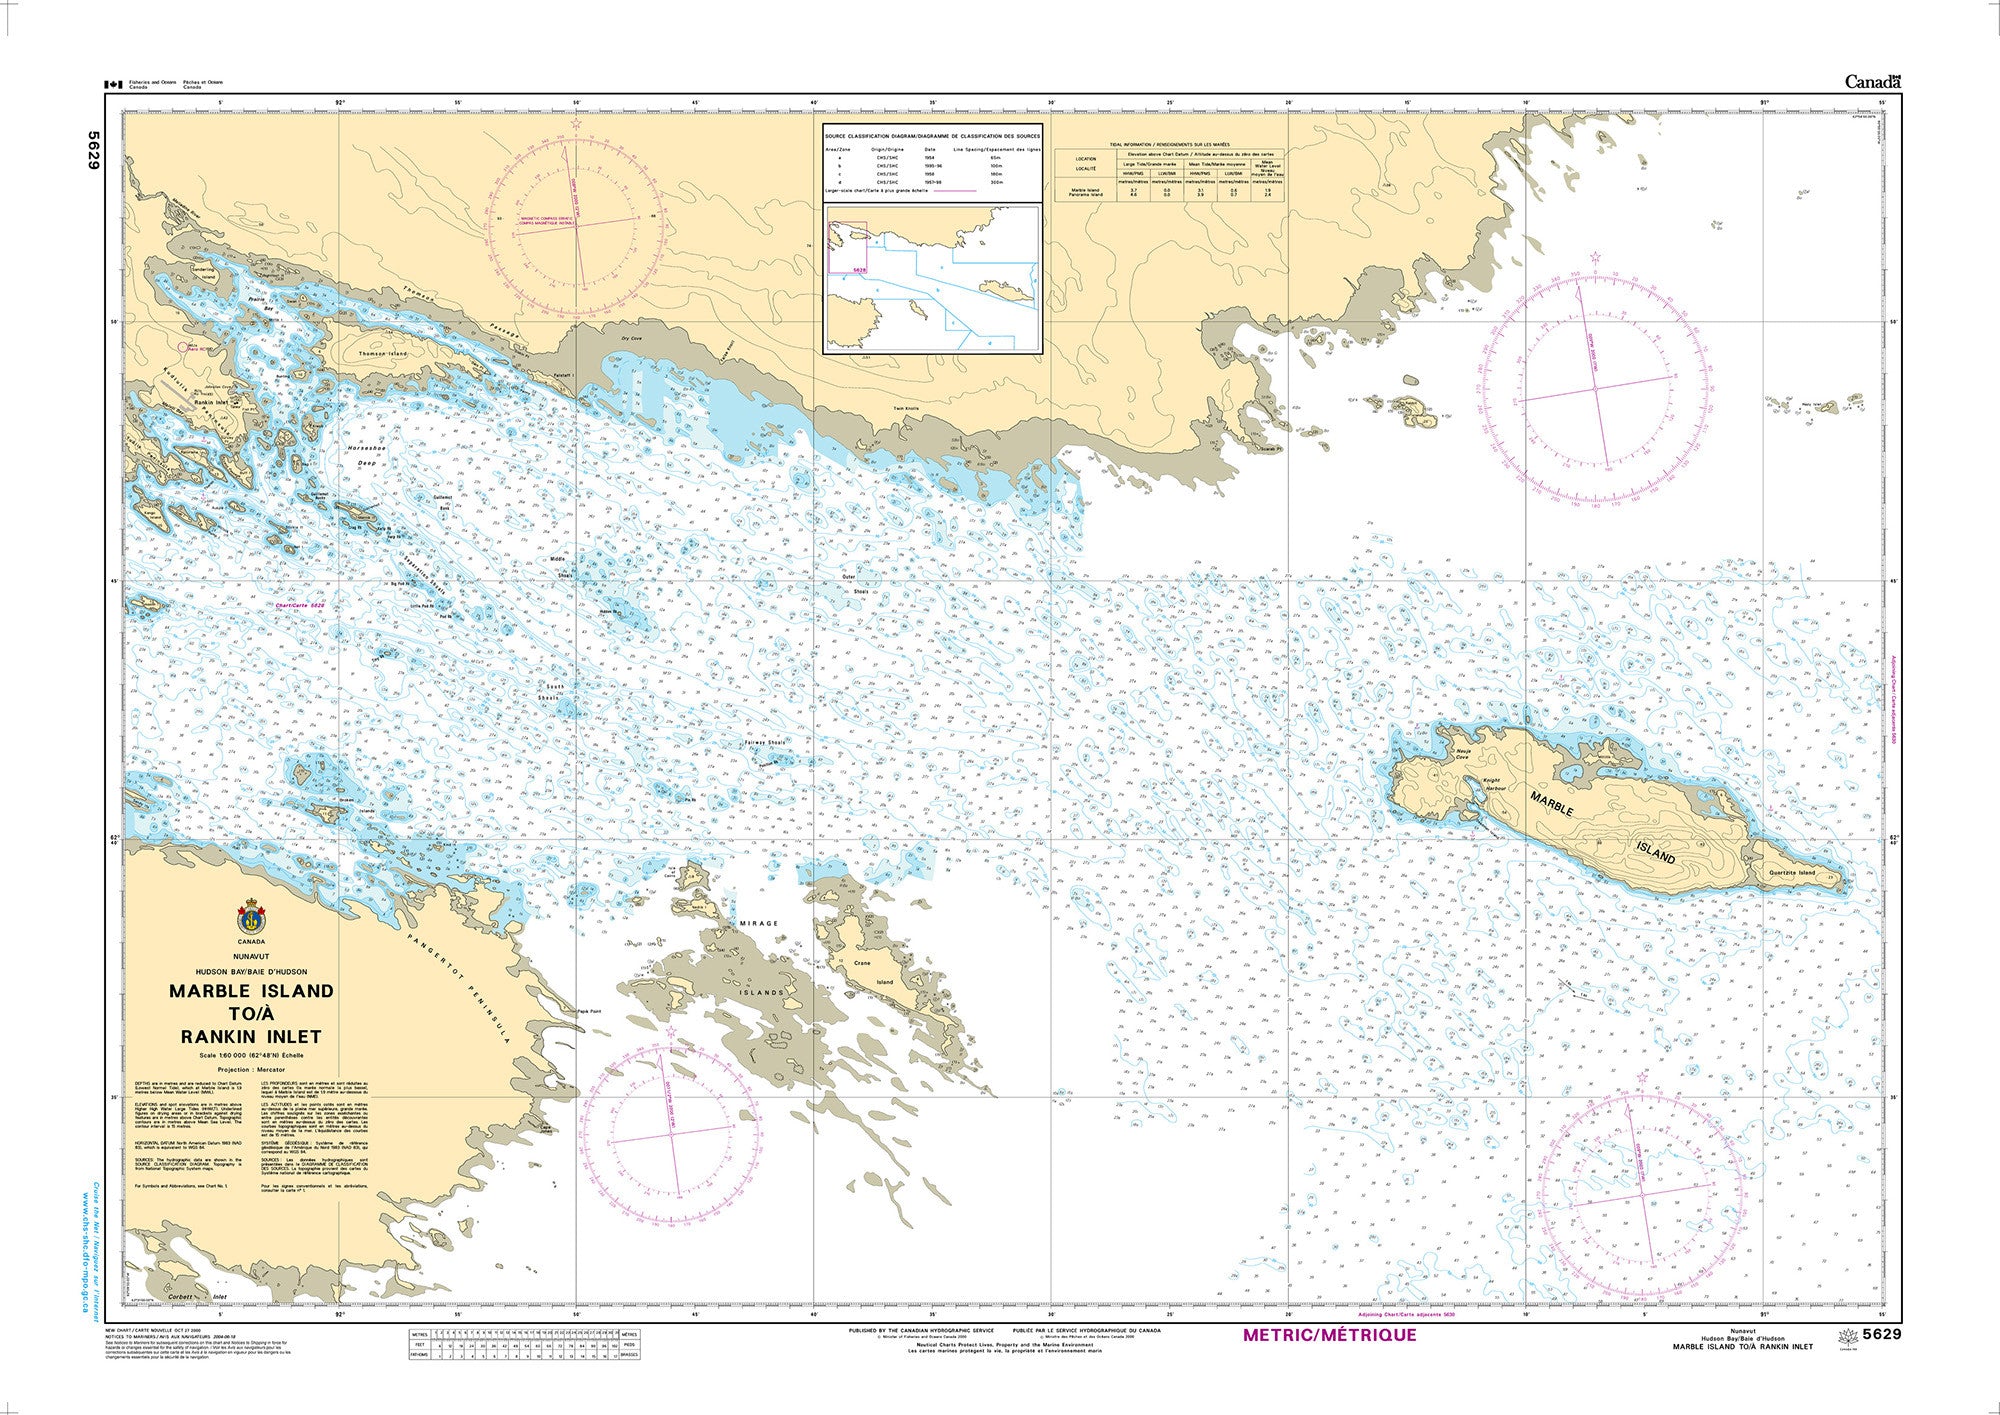 Canadian Hydrographic Service Nautical Chart CHS5629: Marble Island to/à Rankin Inlet